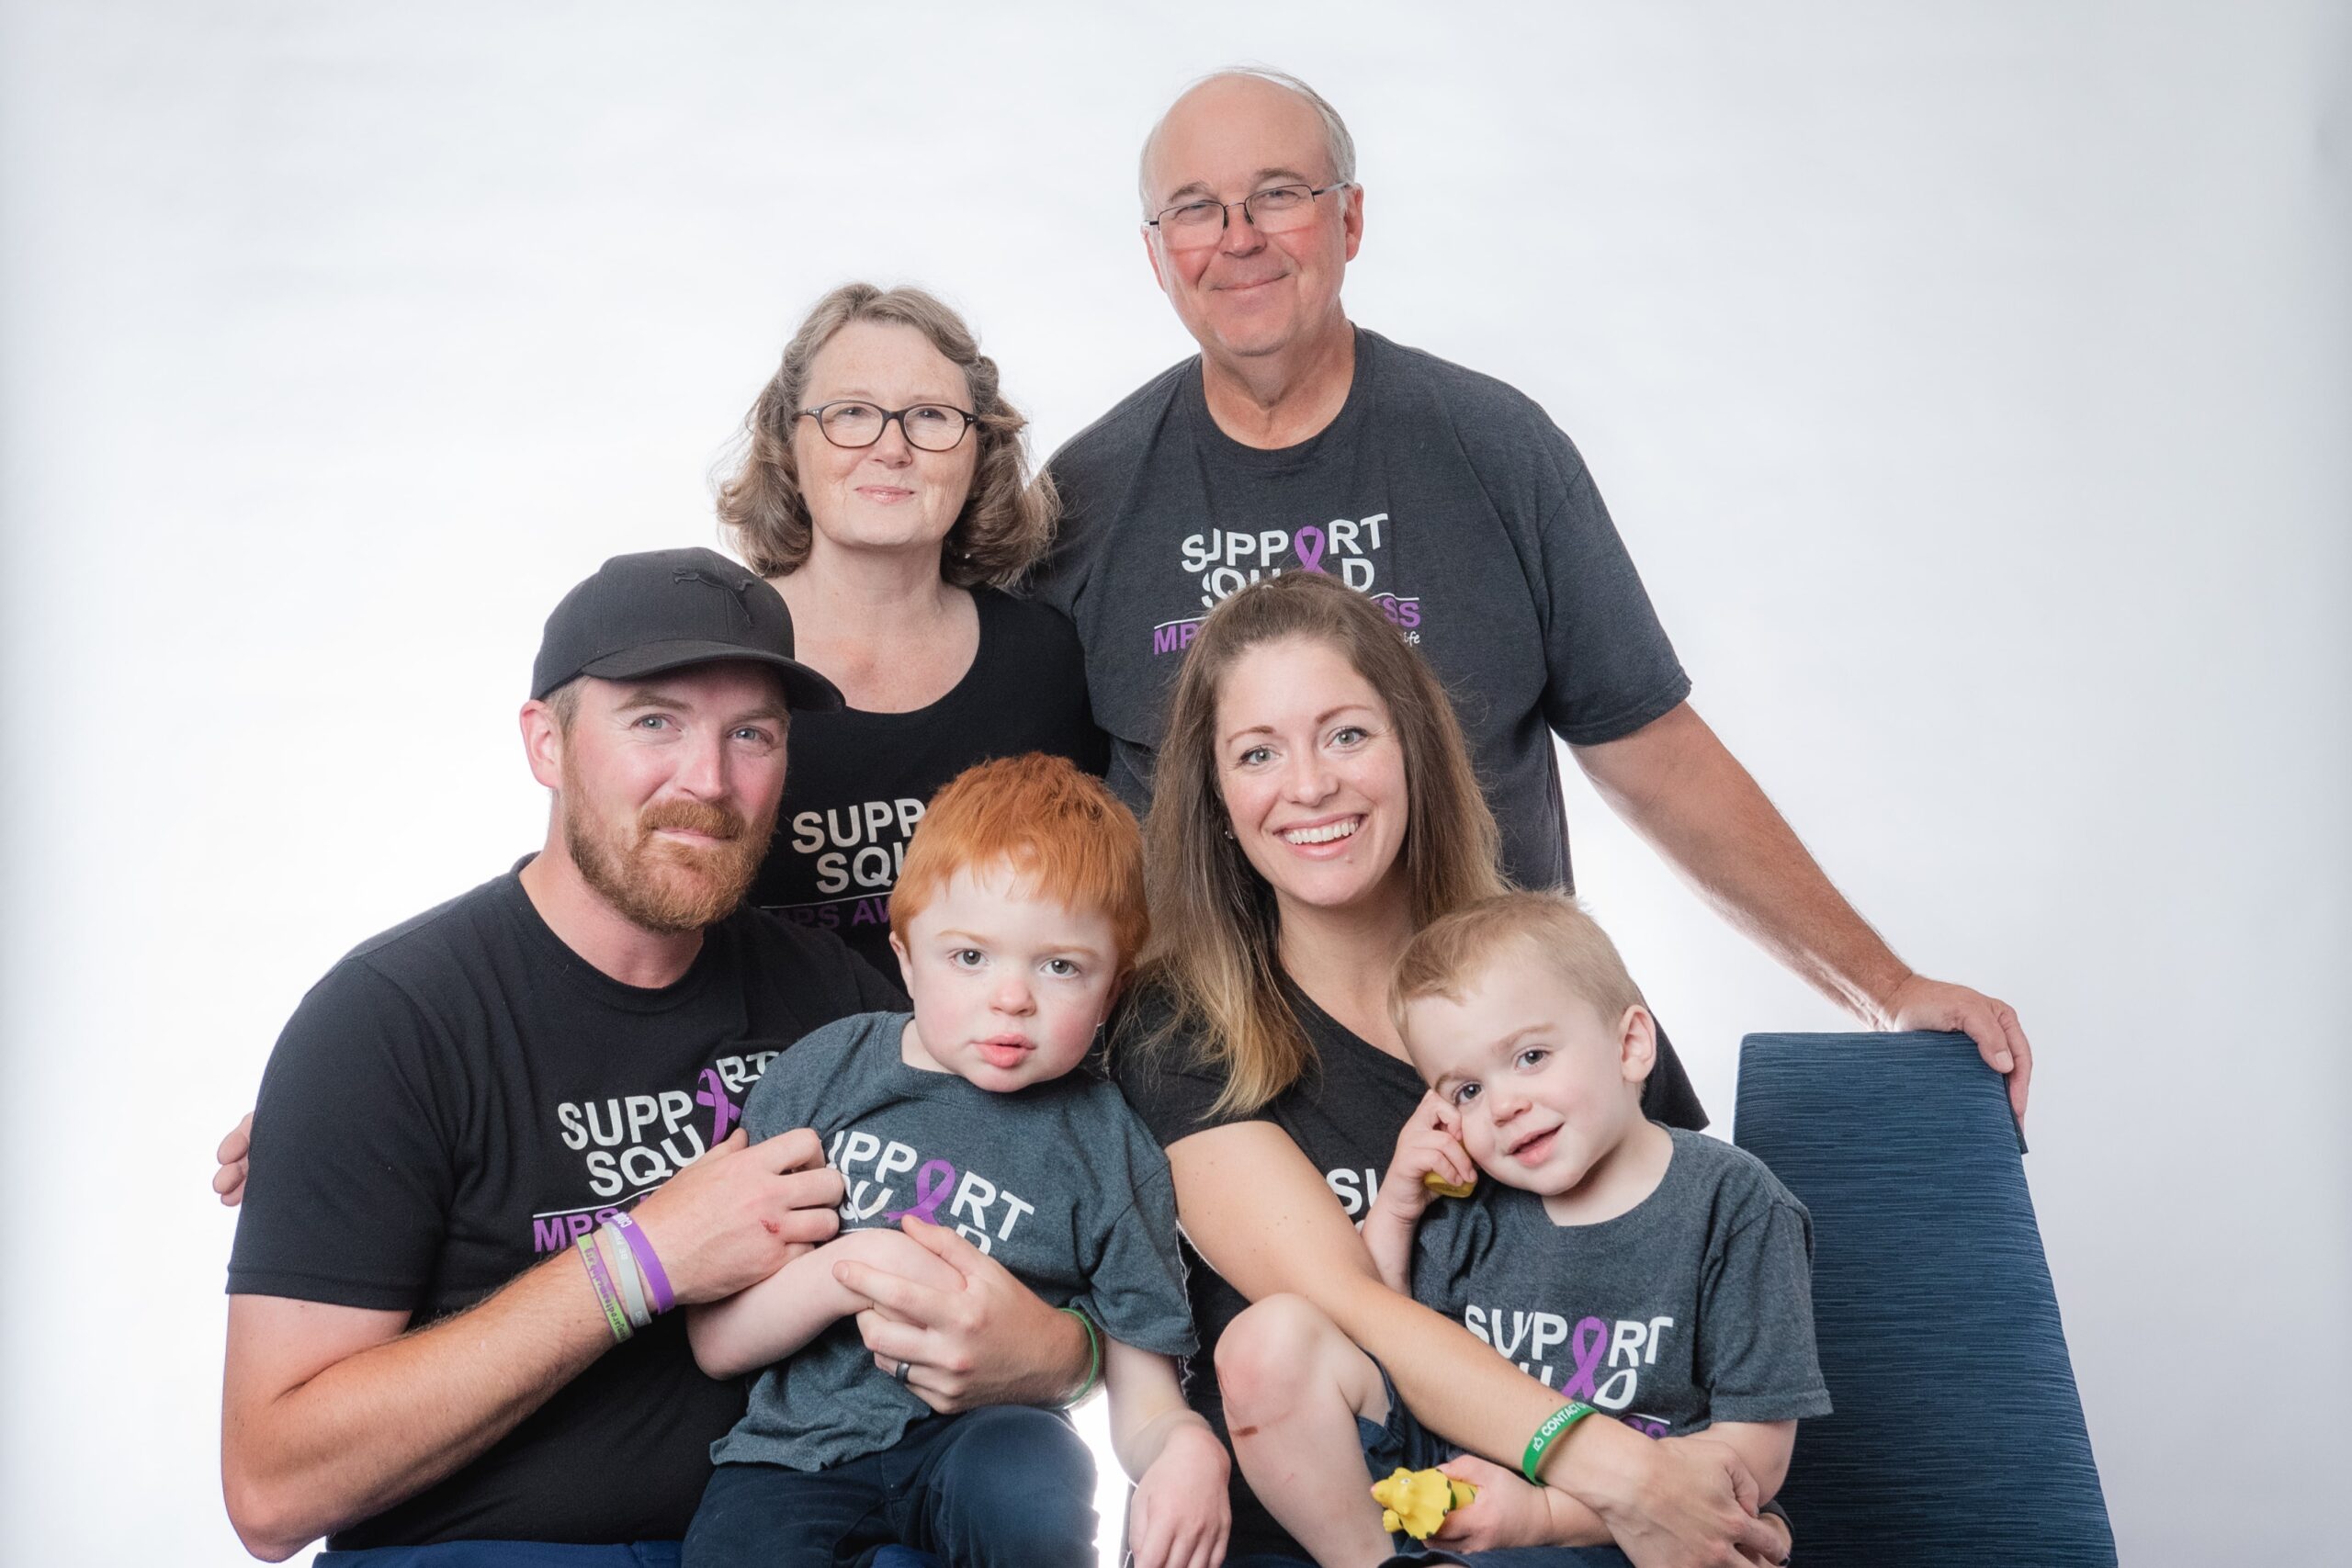 Three generations of family smiling in matching MPS awareness tshirts